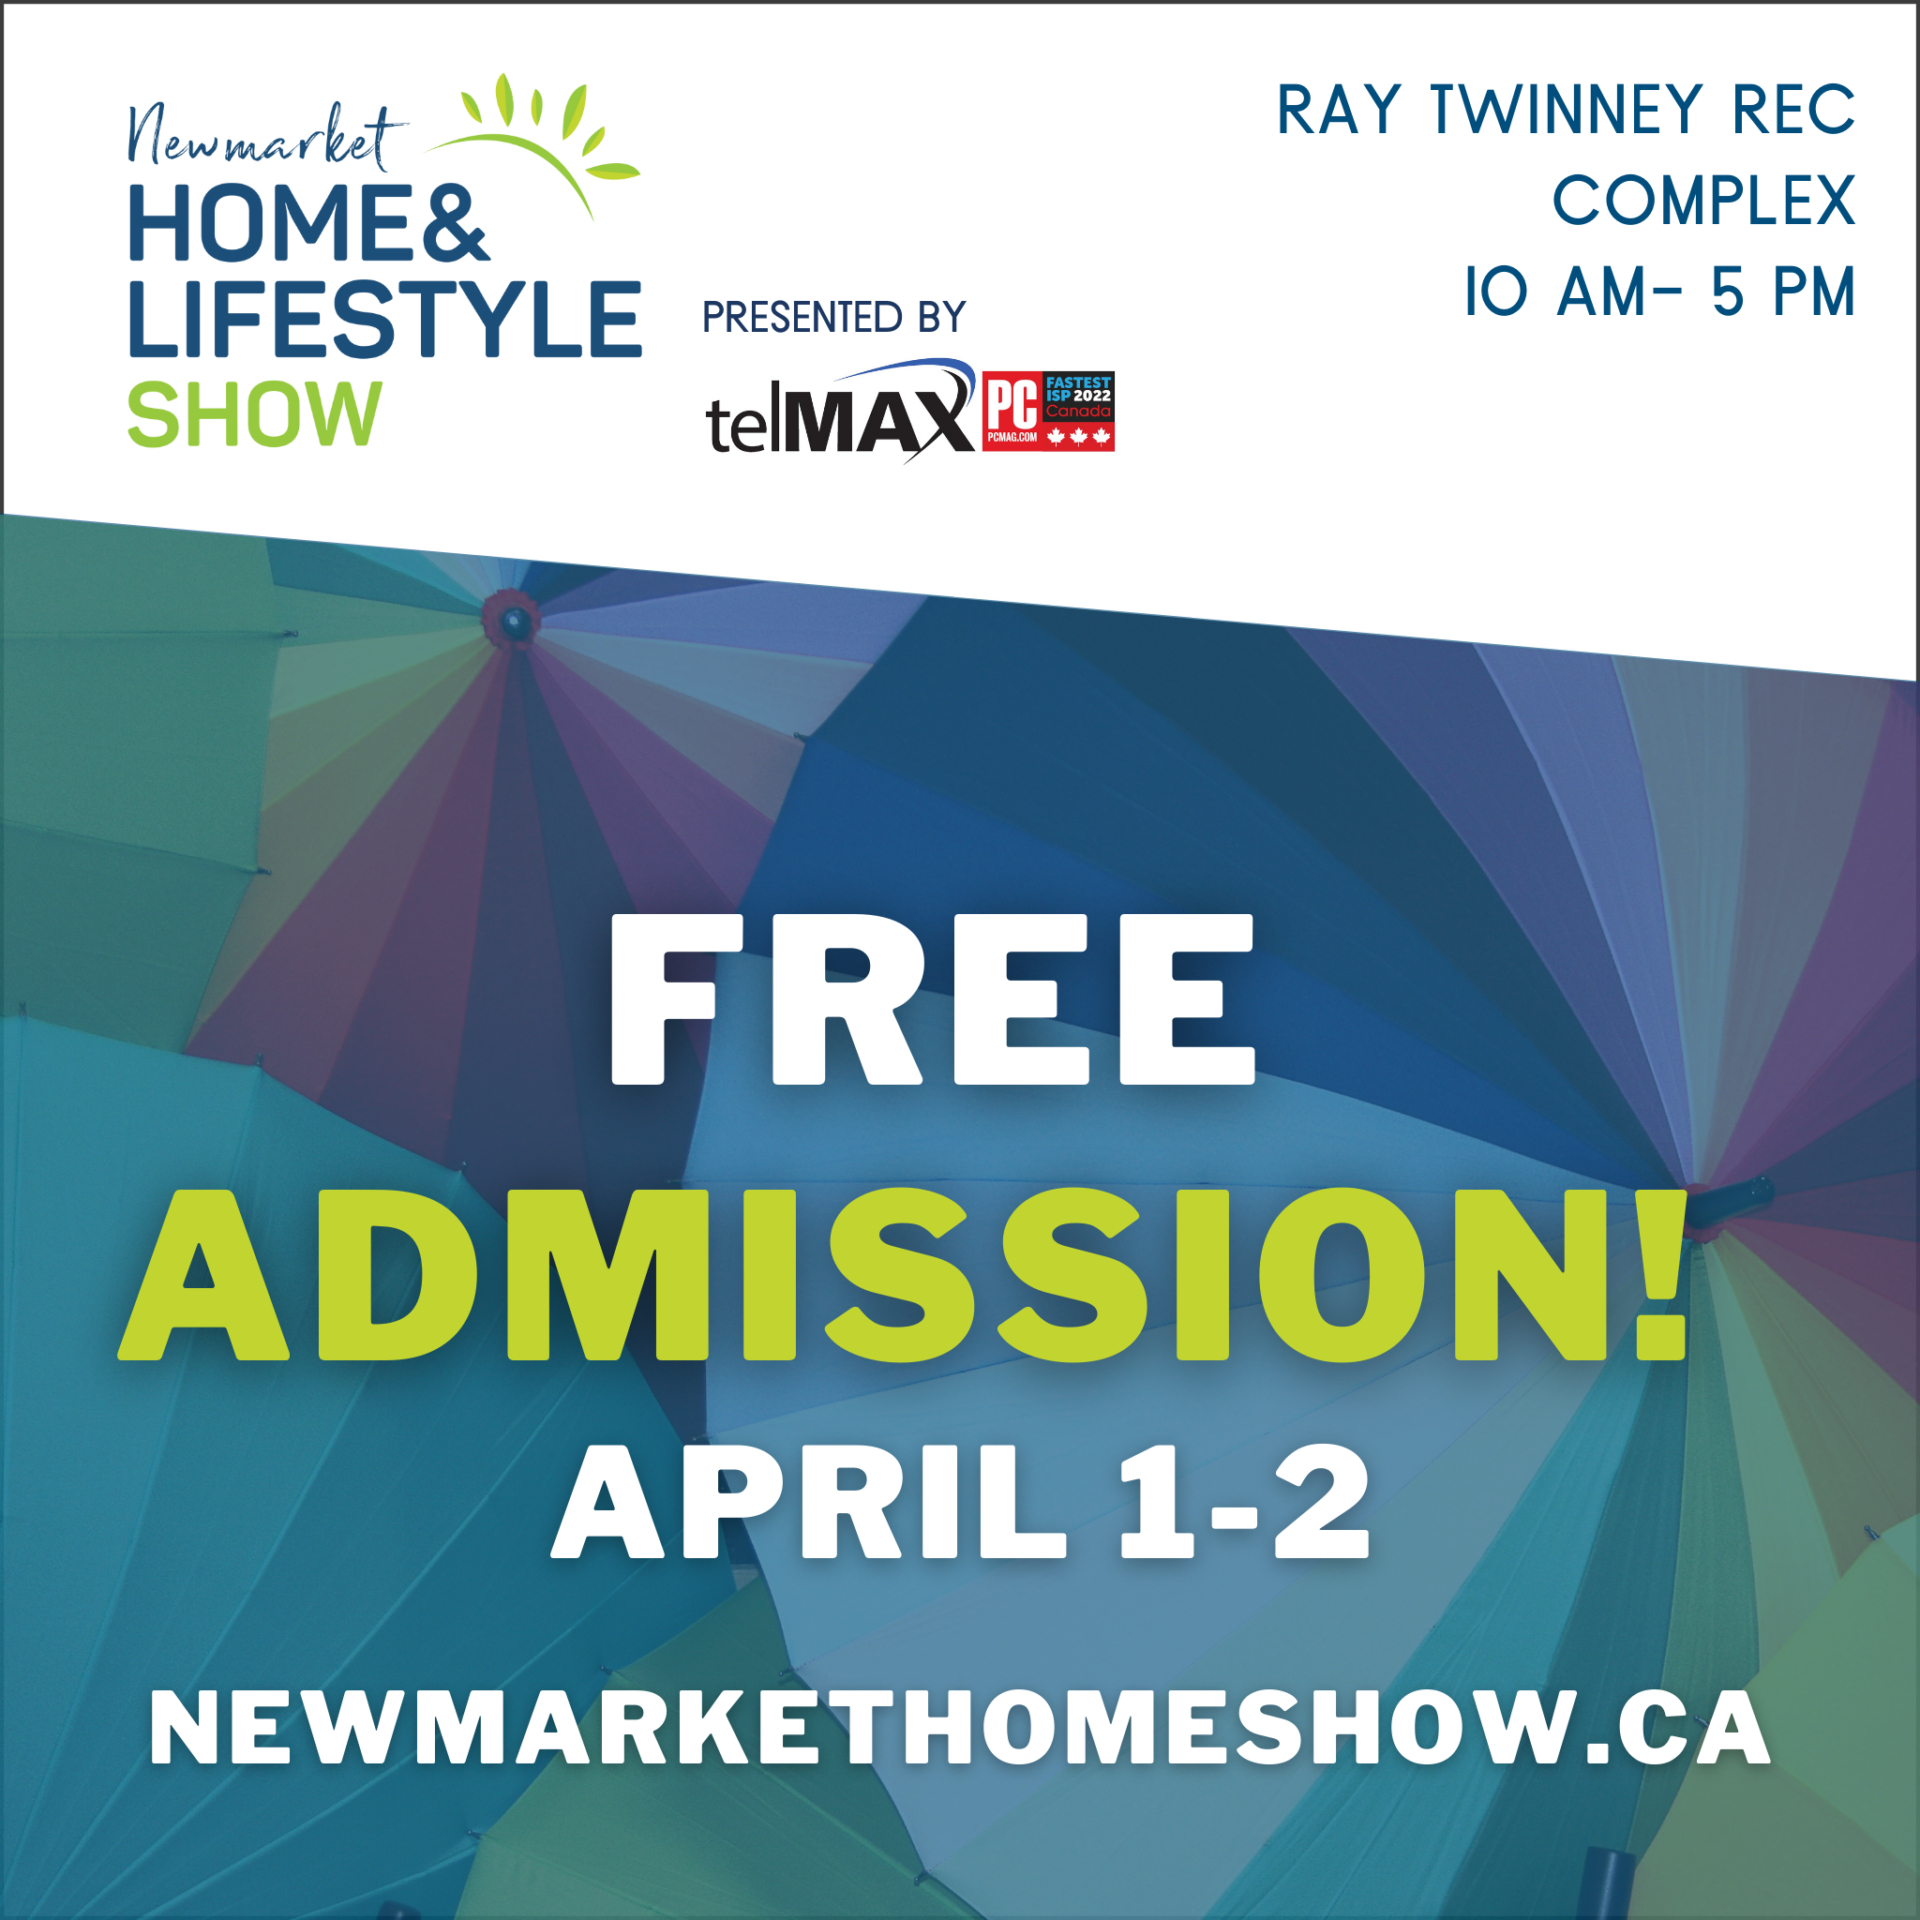 Newmarket Home & Lifestyle Show